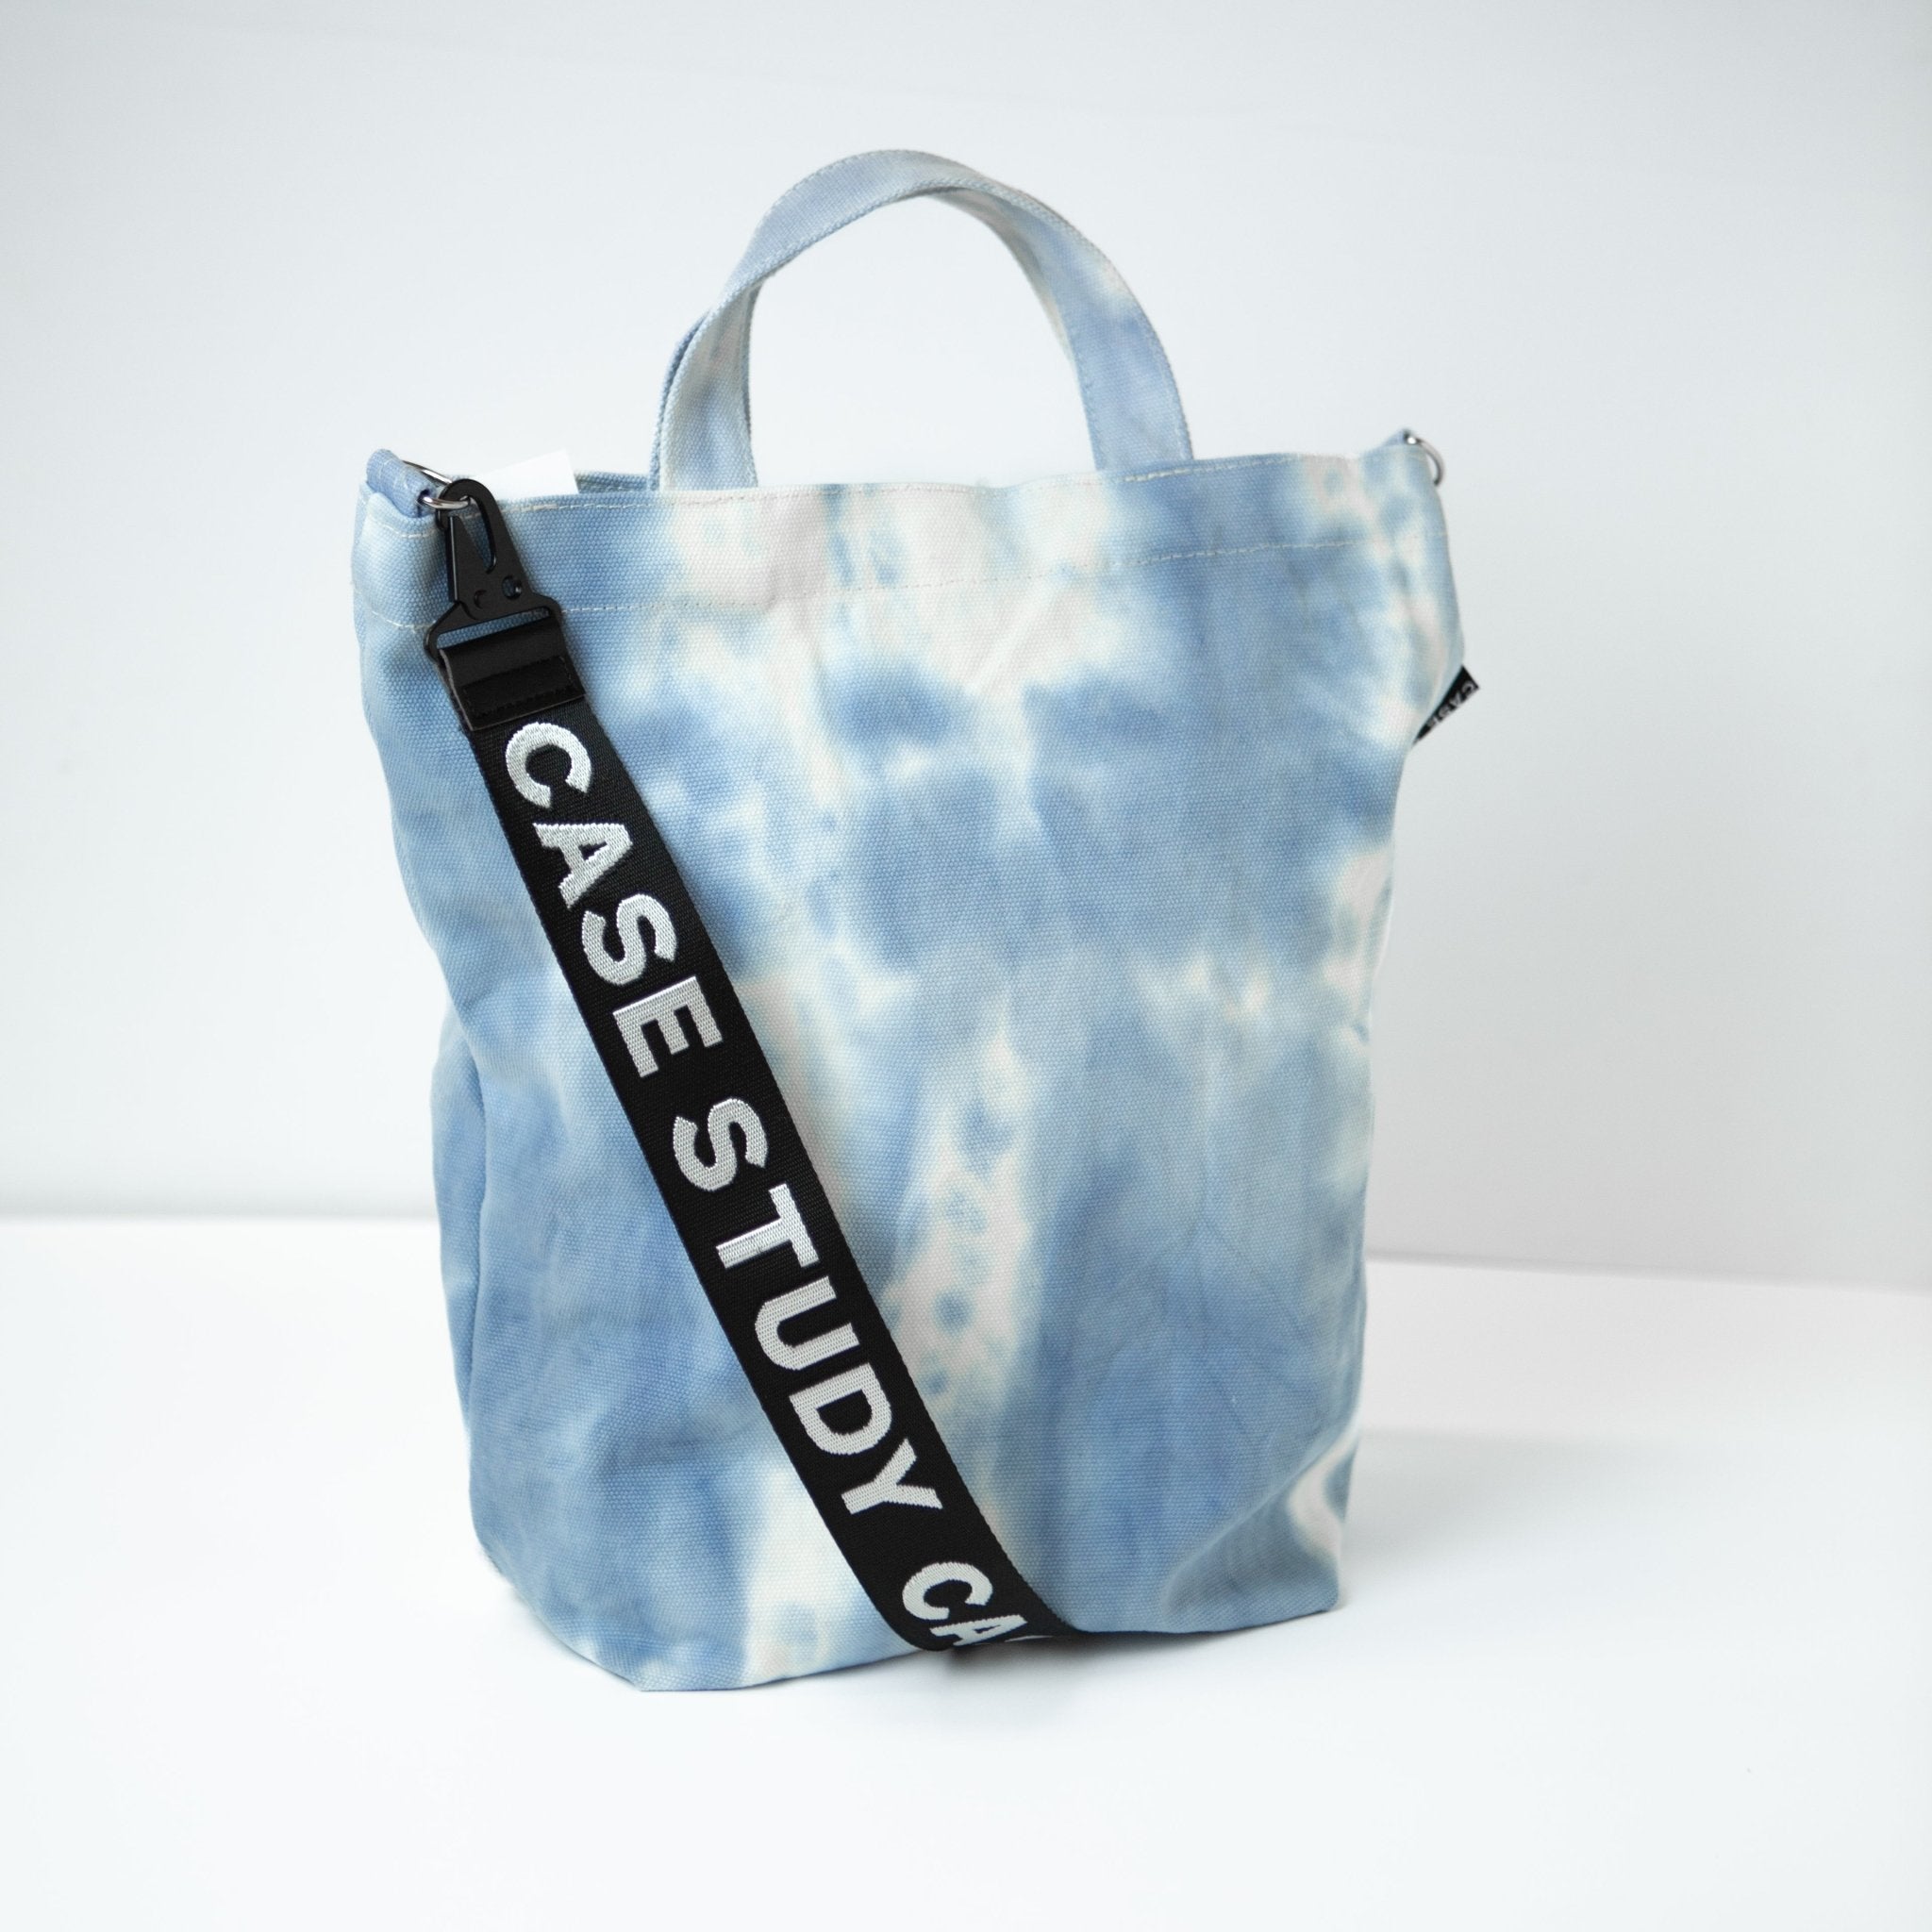 a tie dyed canvas tote in a pale blue and white color with a black and white Case Study crossbody strap